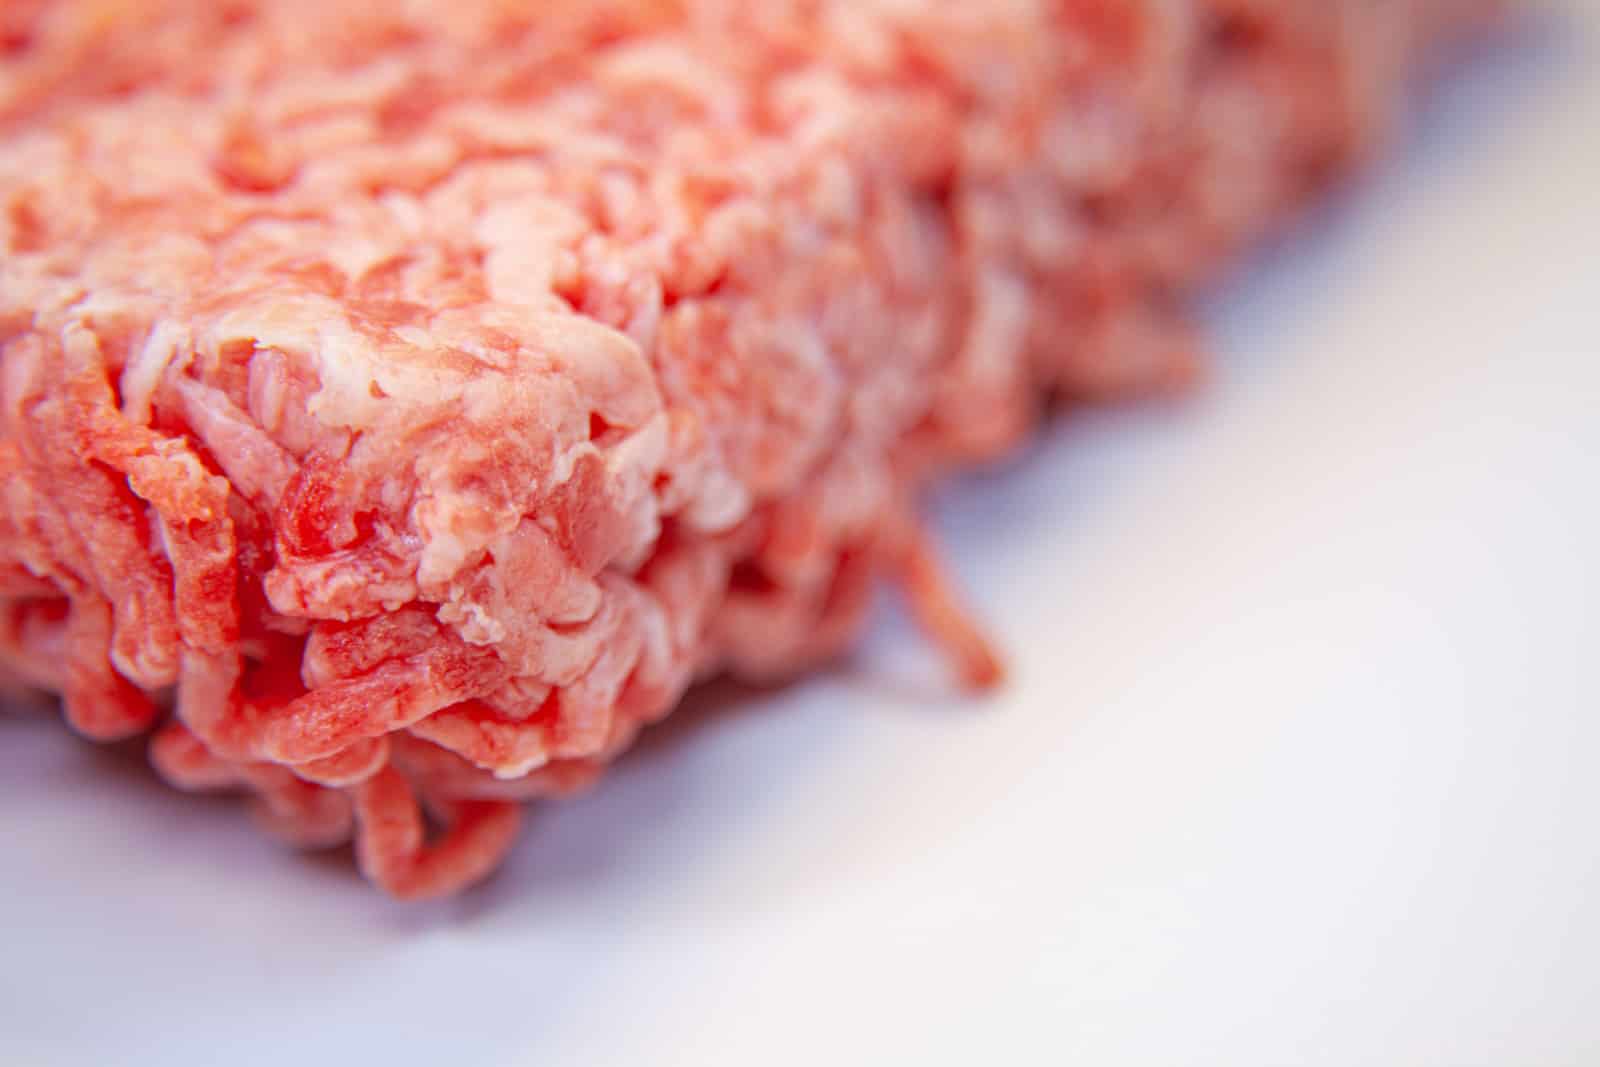 Minced pork and beef frozen, red.